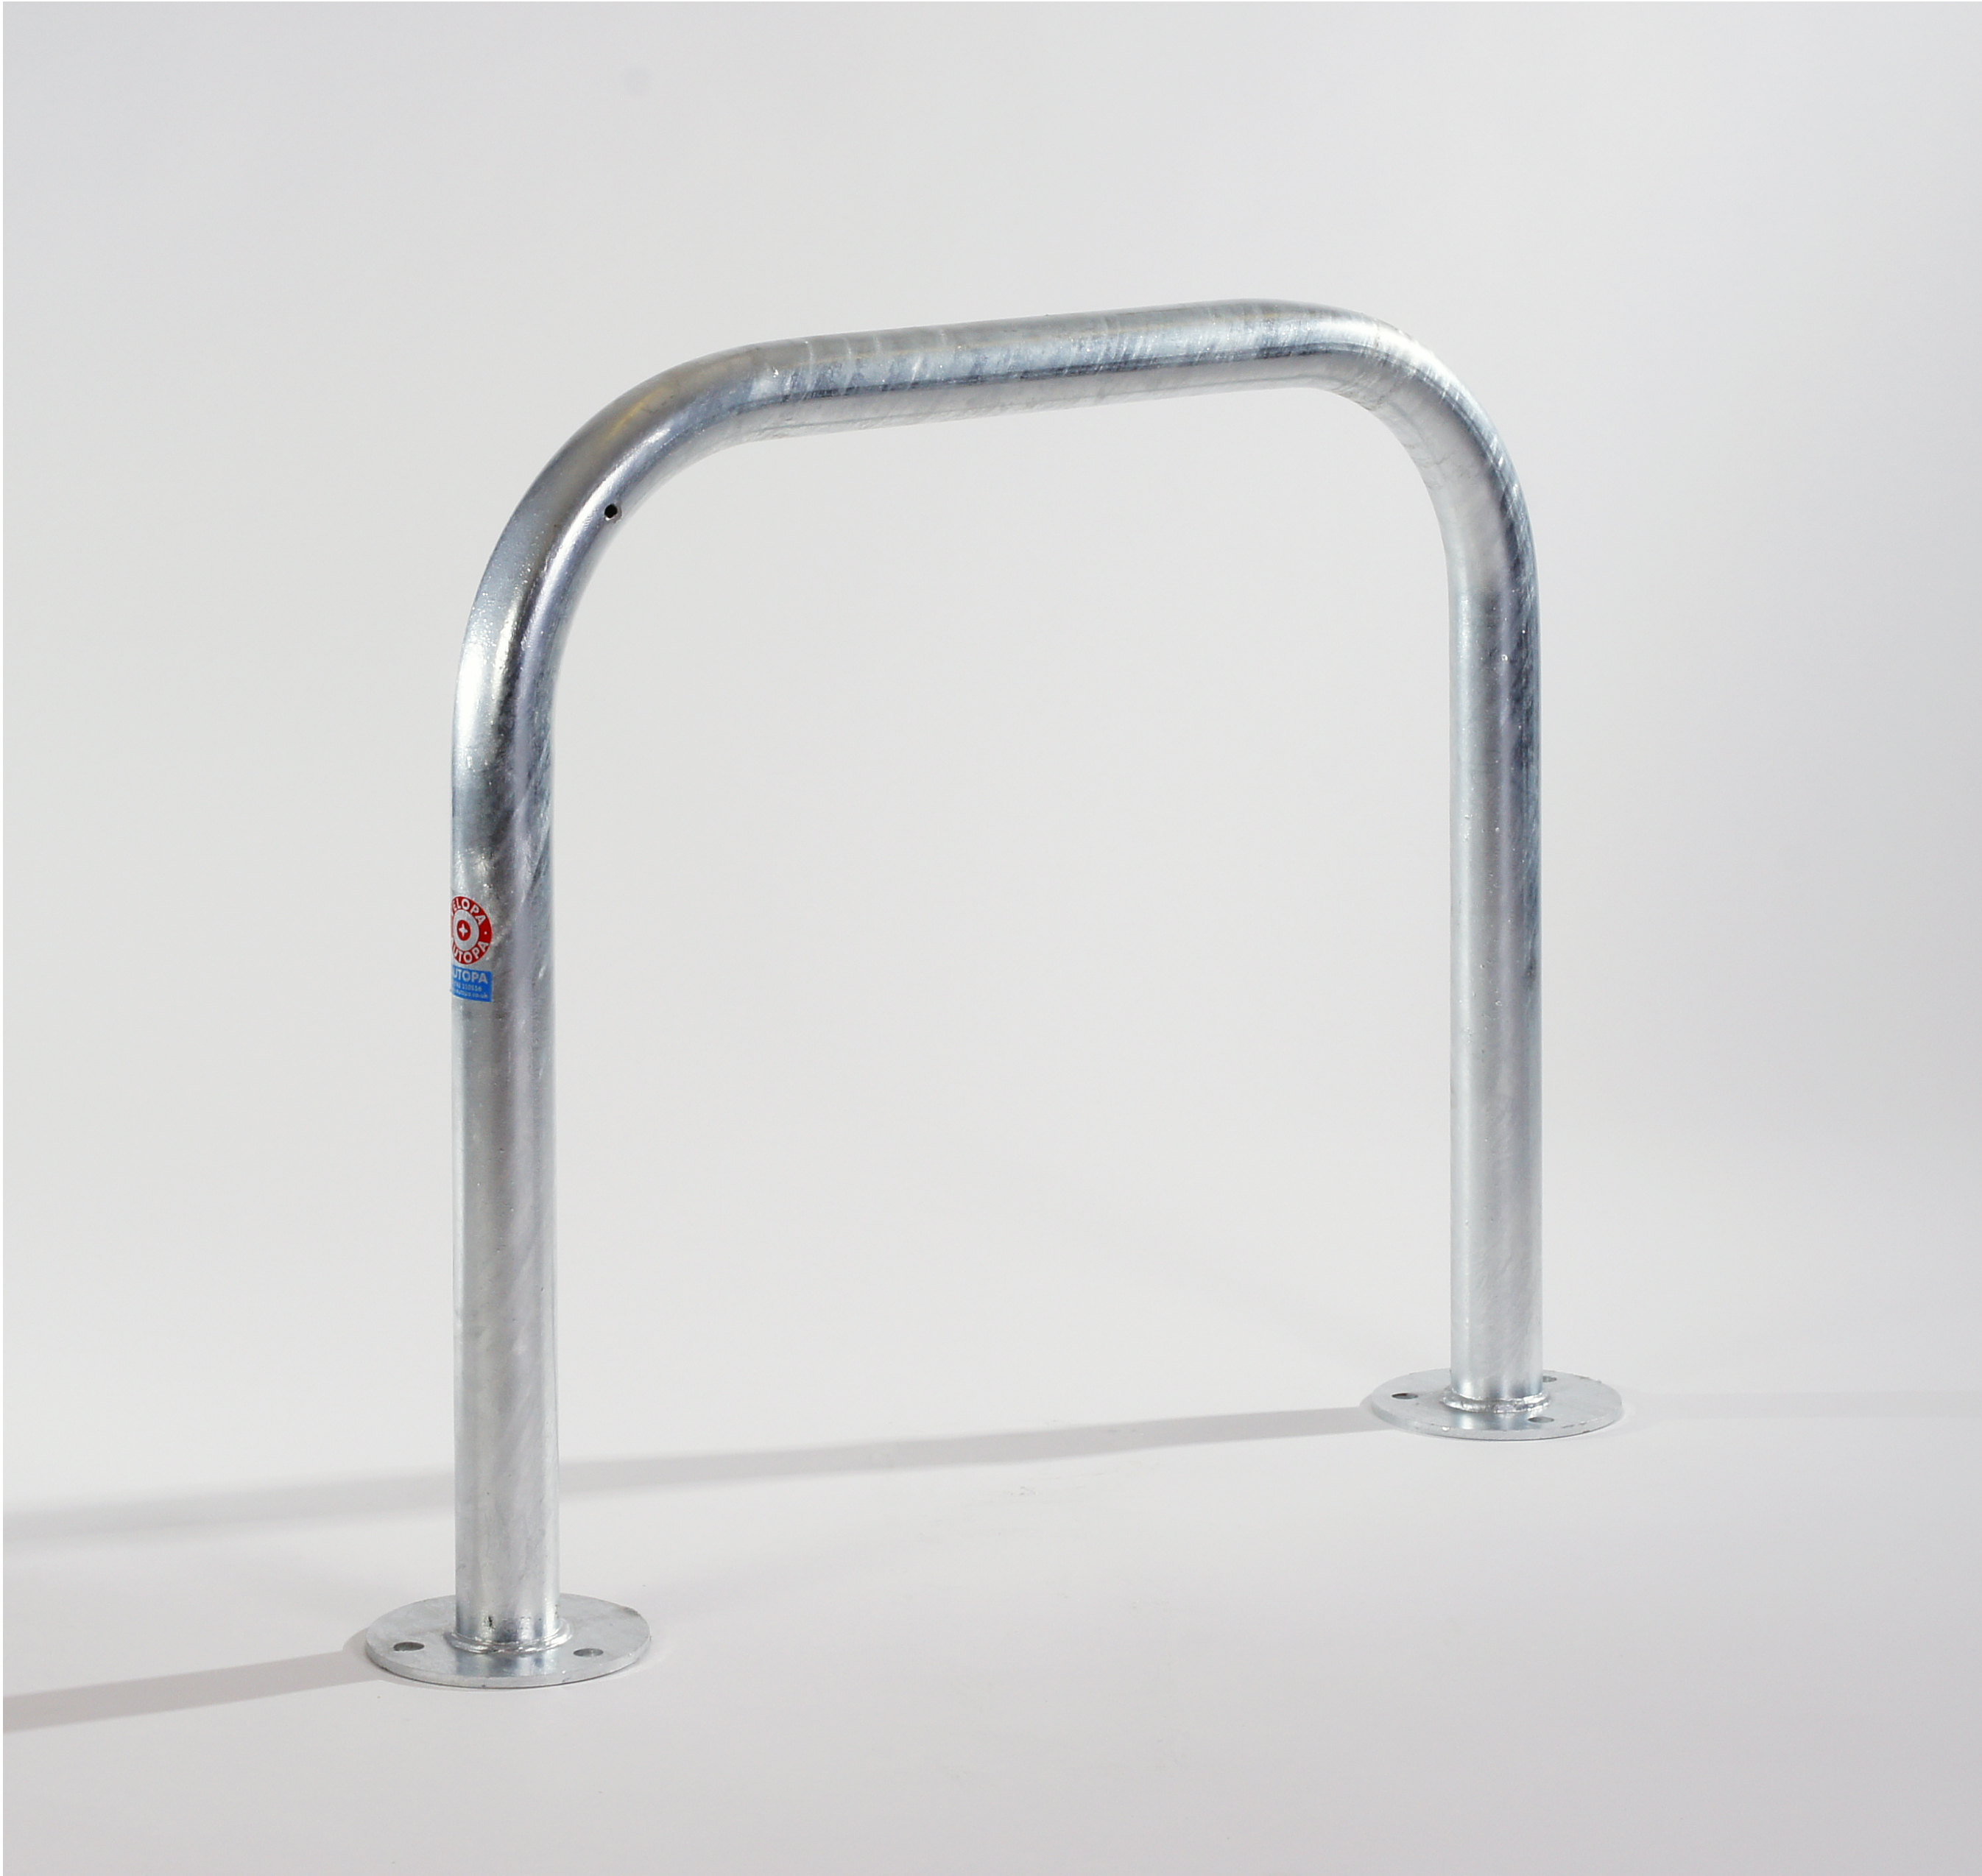 kids cycle stand